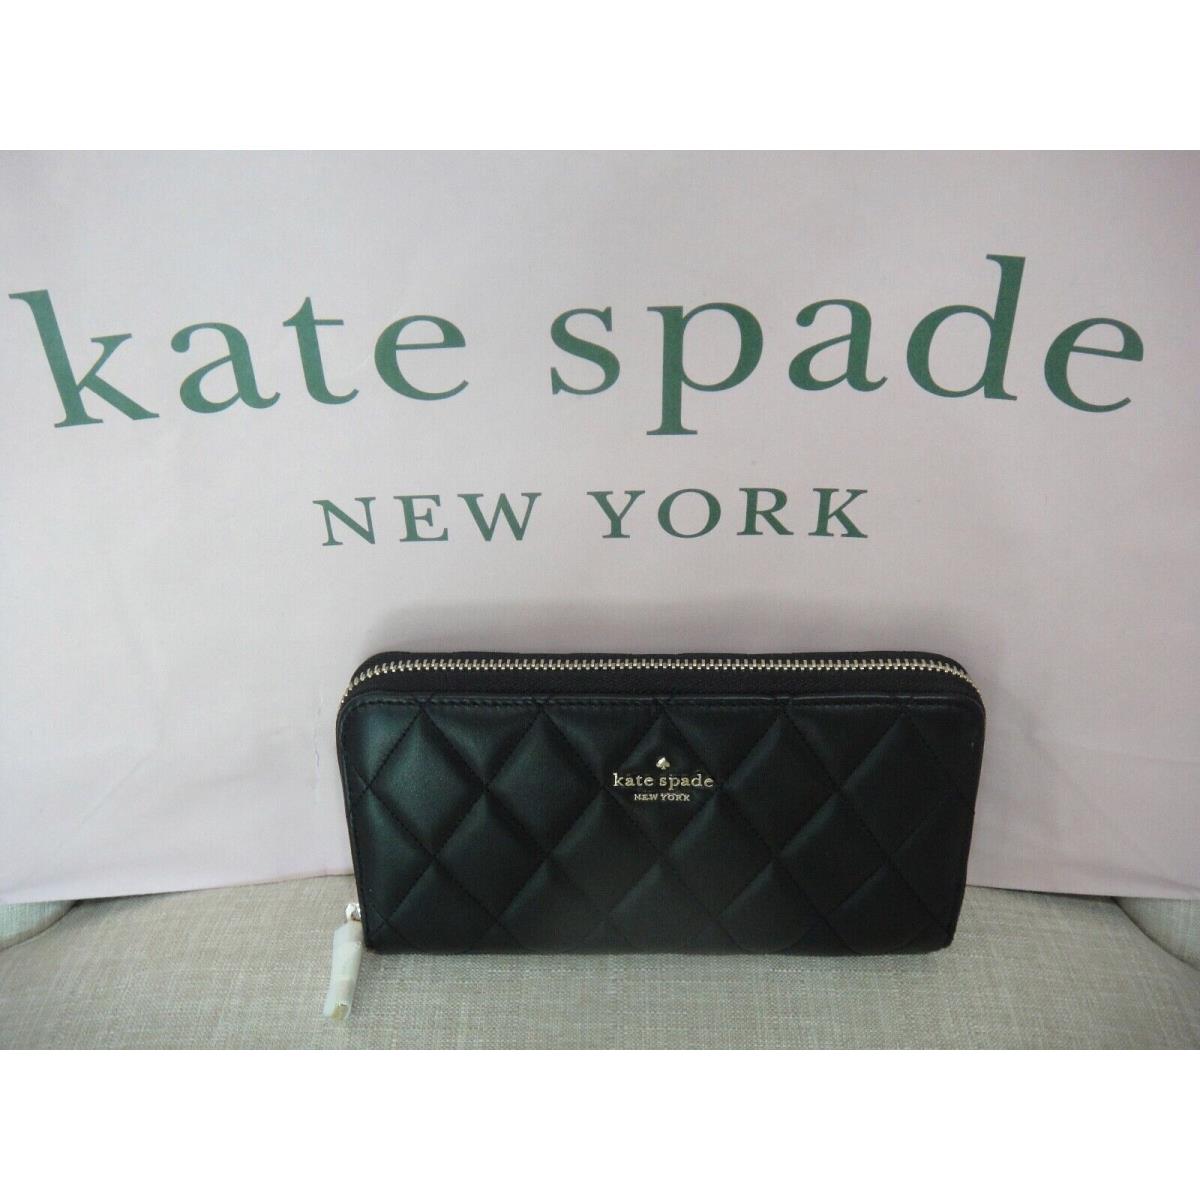 New Kate Spade Carey Smooth Quilted Black Leather Wallet .$249.00.100%AUTHENTIC